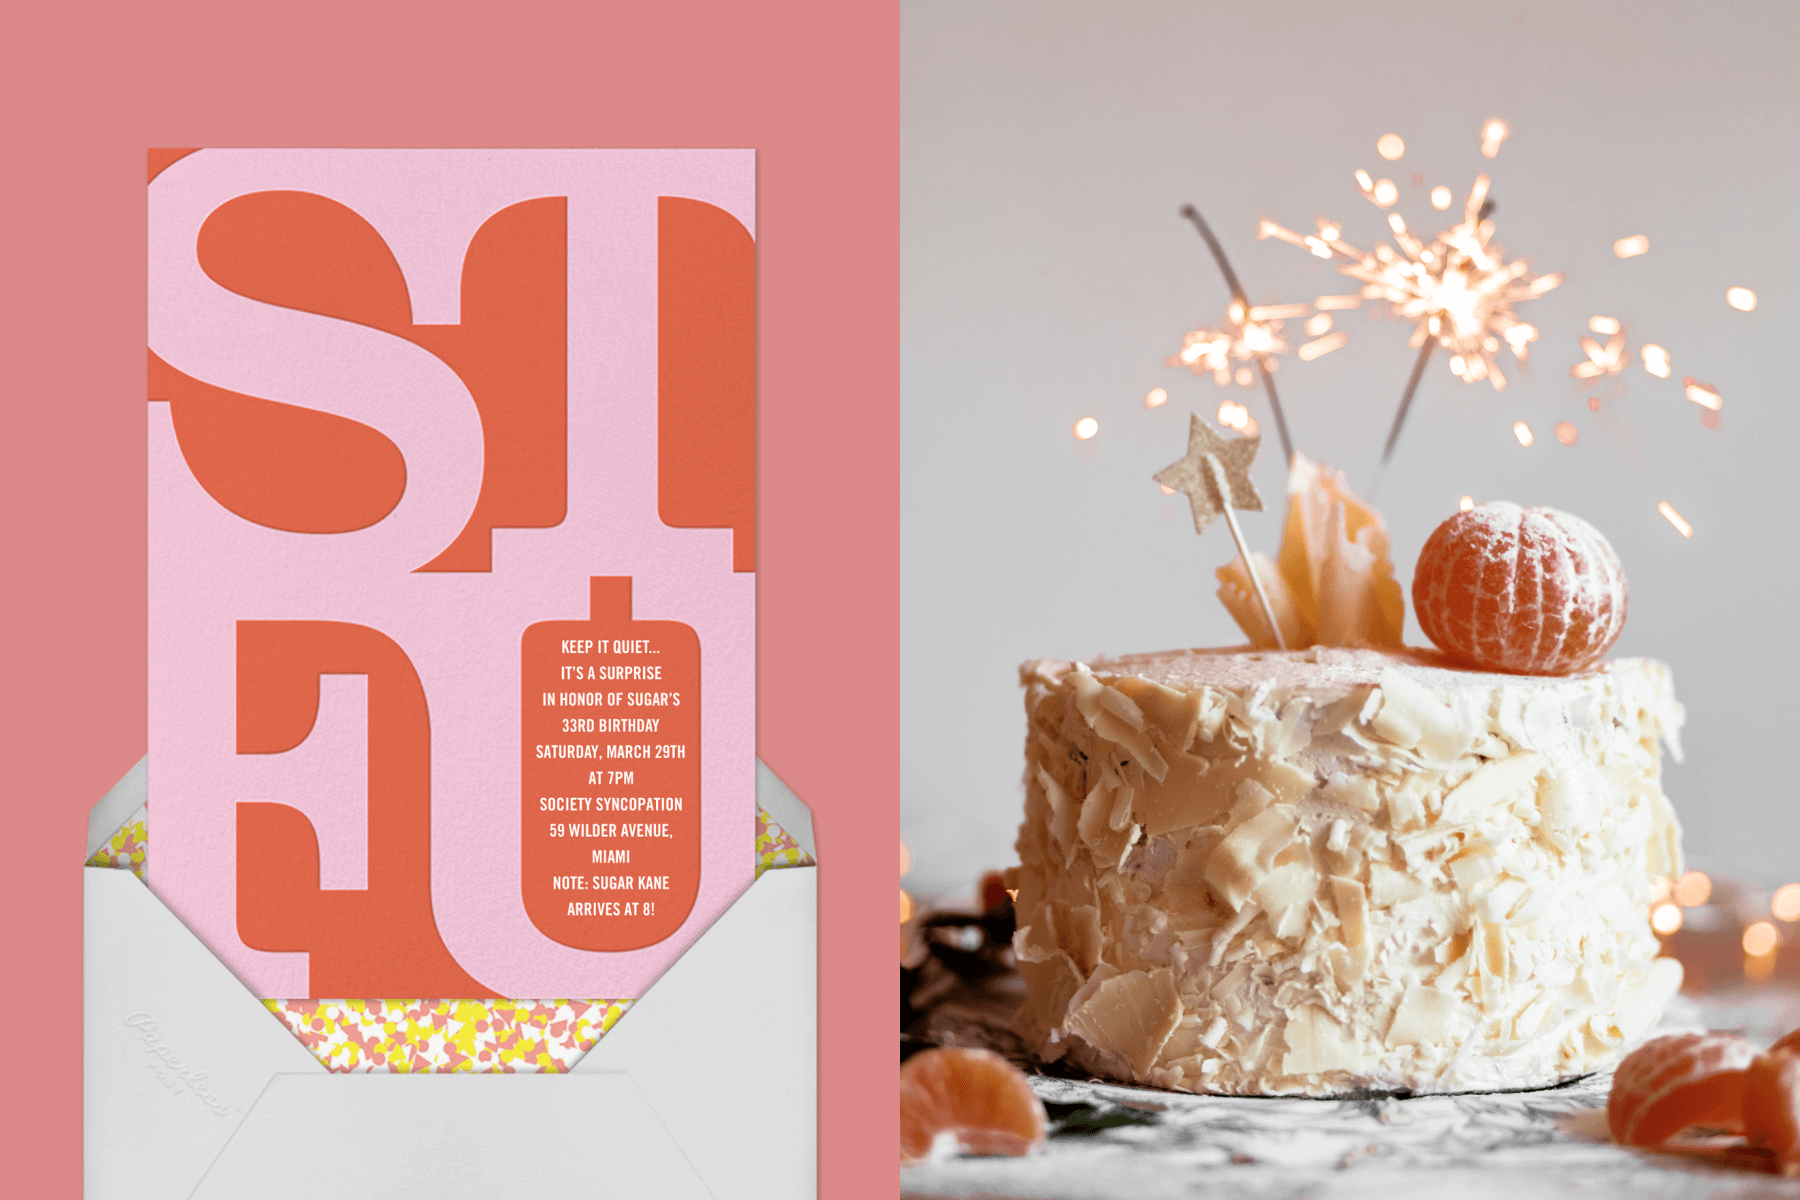 Left: A red and pink invitation with the letters STFU. Right: A single-layer cake with citrus fruit and sparklers on top.